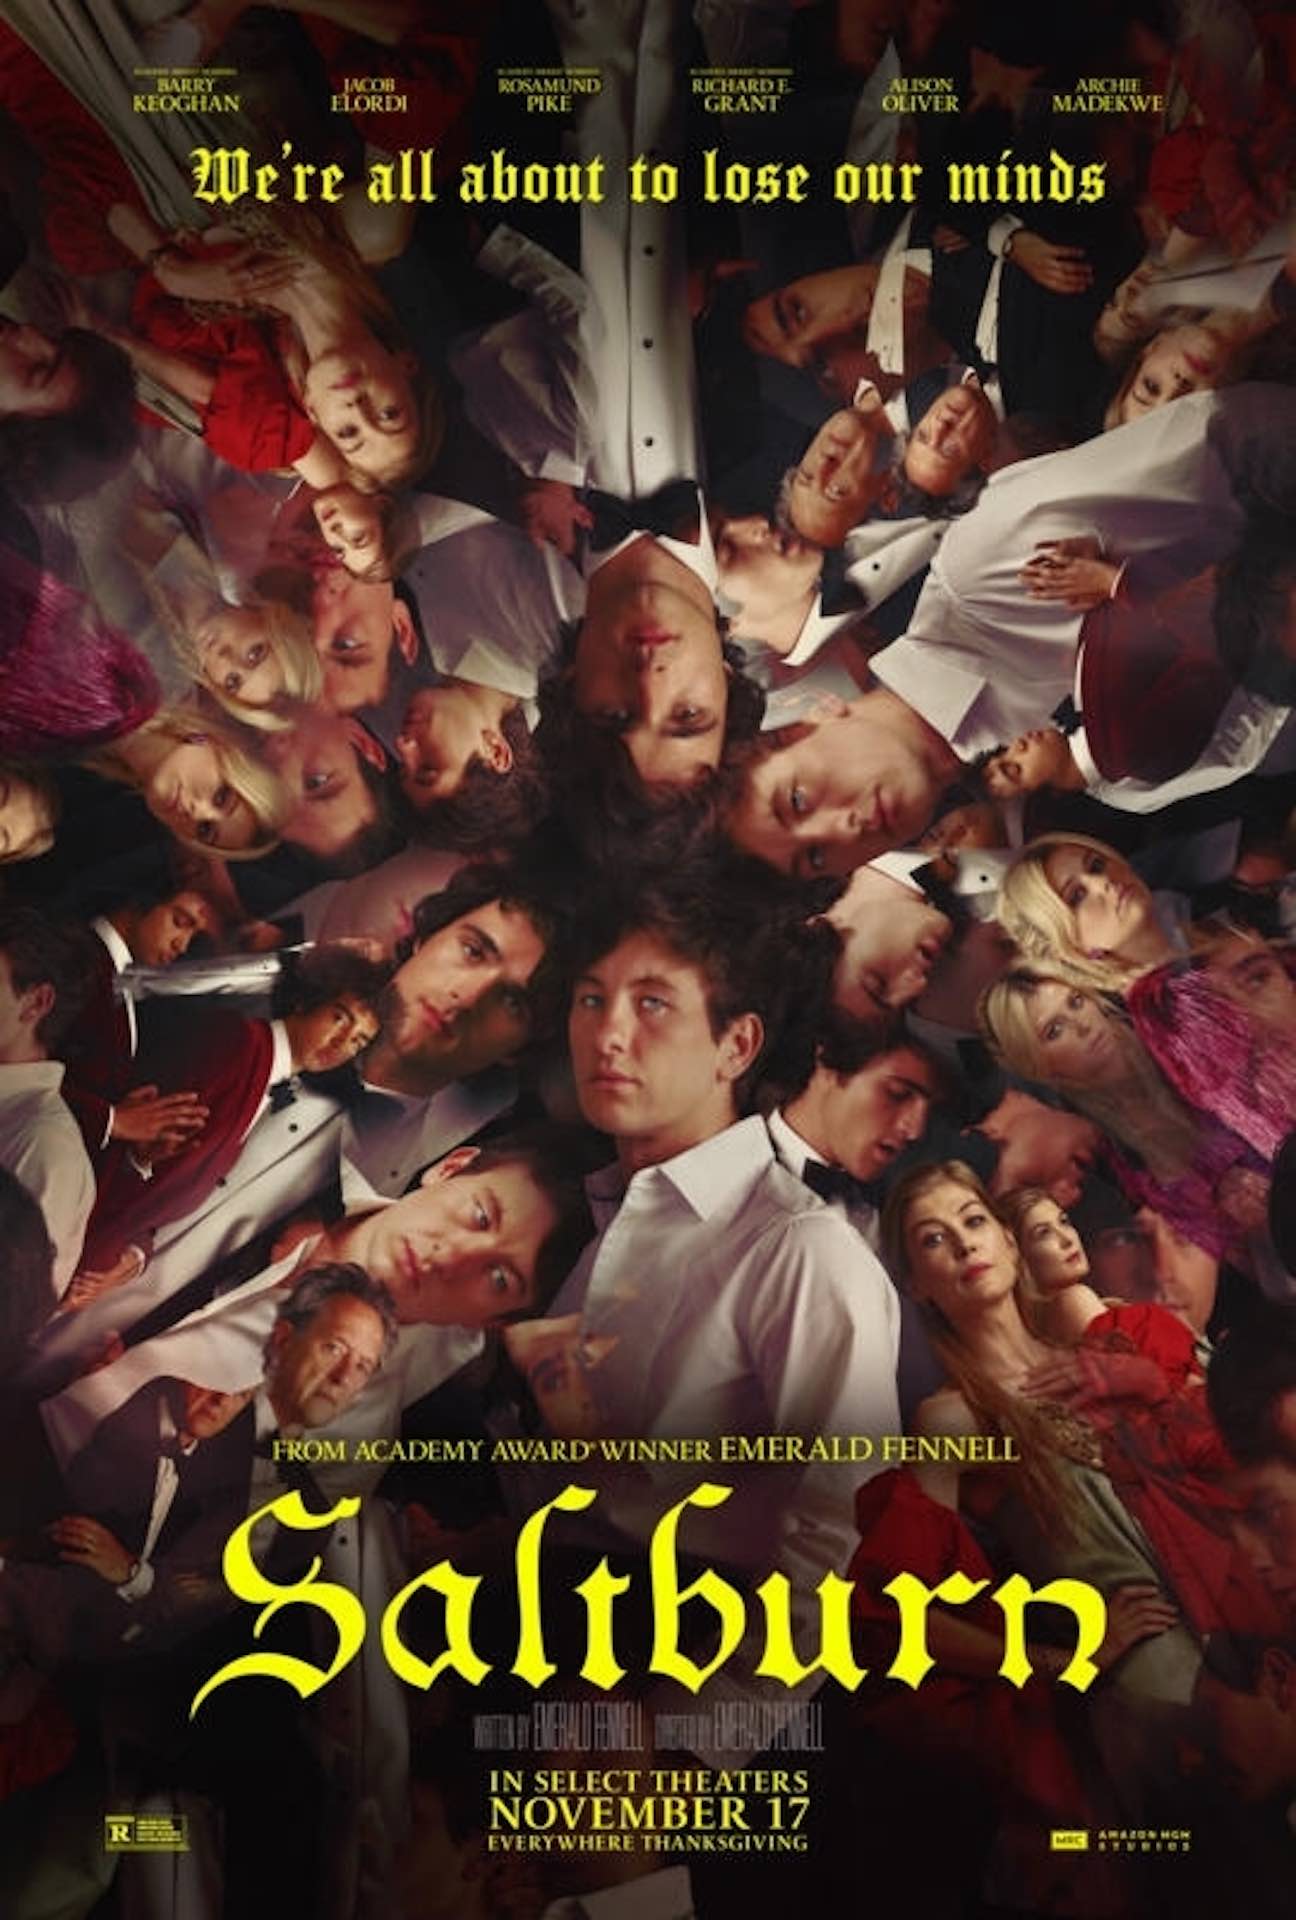 Key art for Saltburn, directed by Emerald Fennell. Image courtesy of MGM and Amazon Studios.